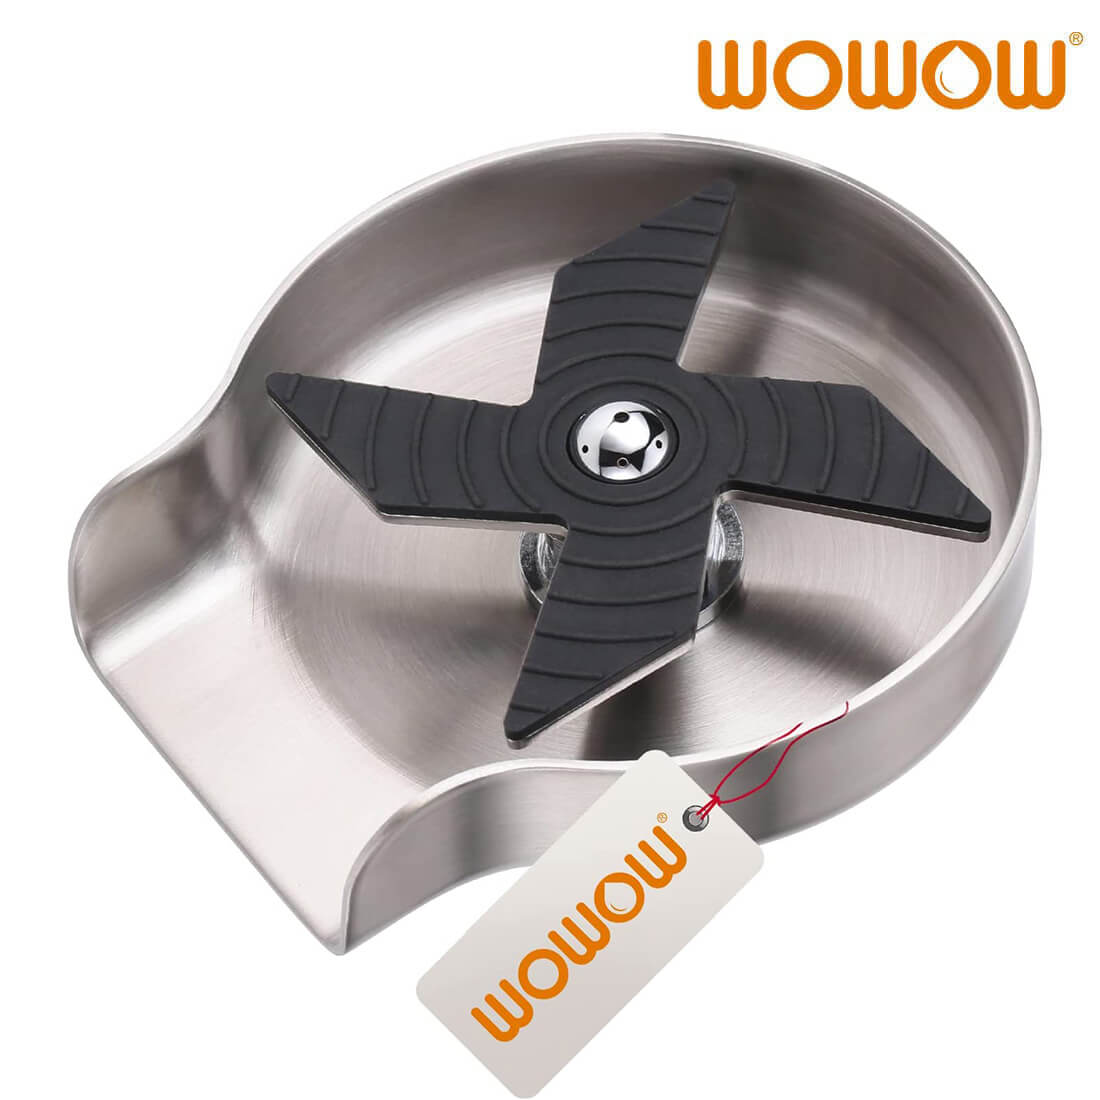 wowow brushed nickel stainless steel glass rinser